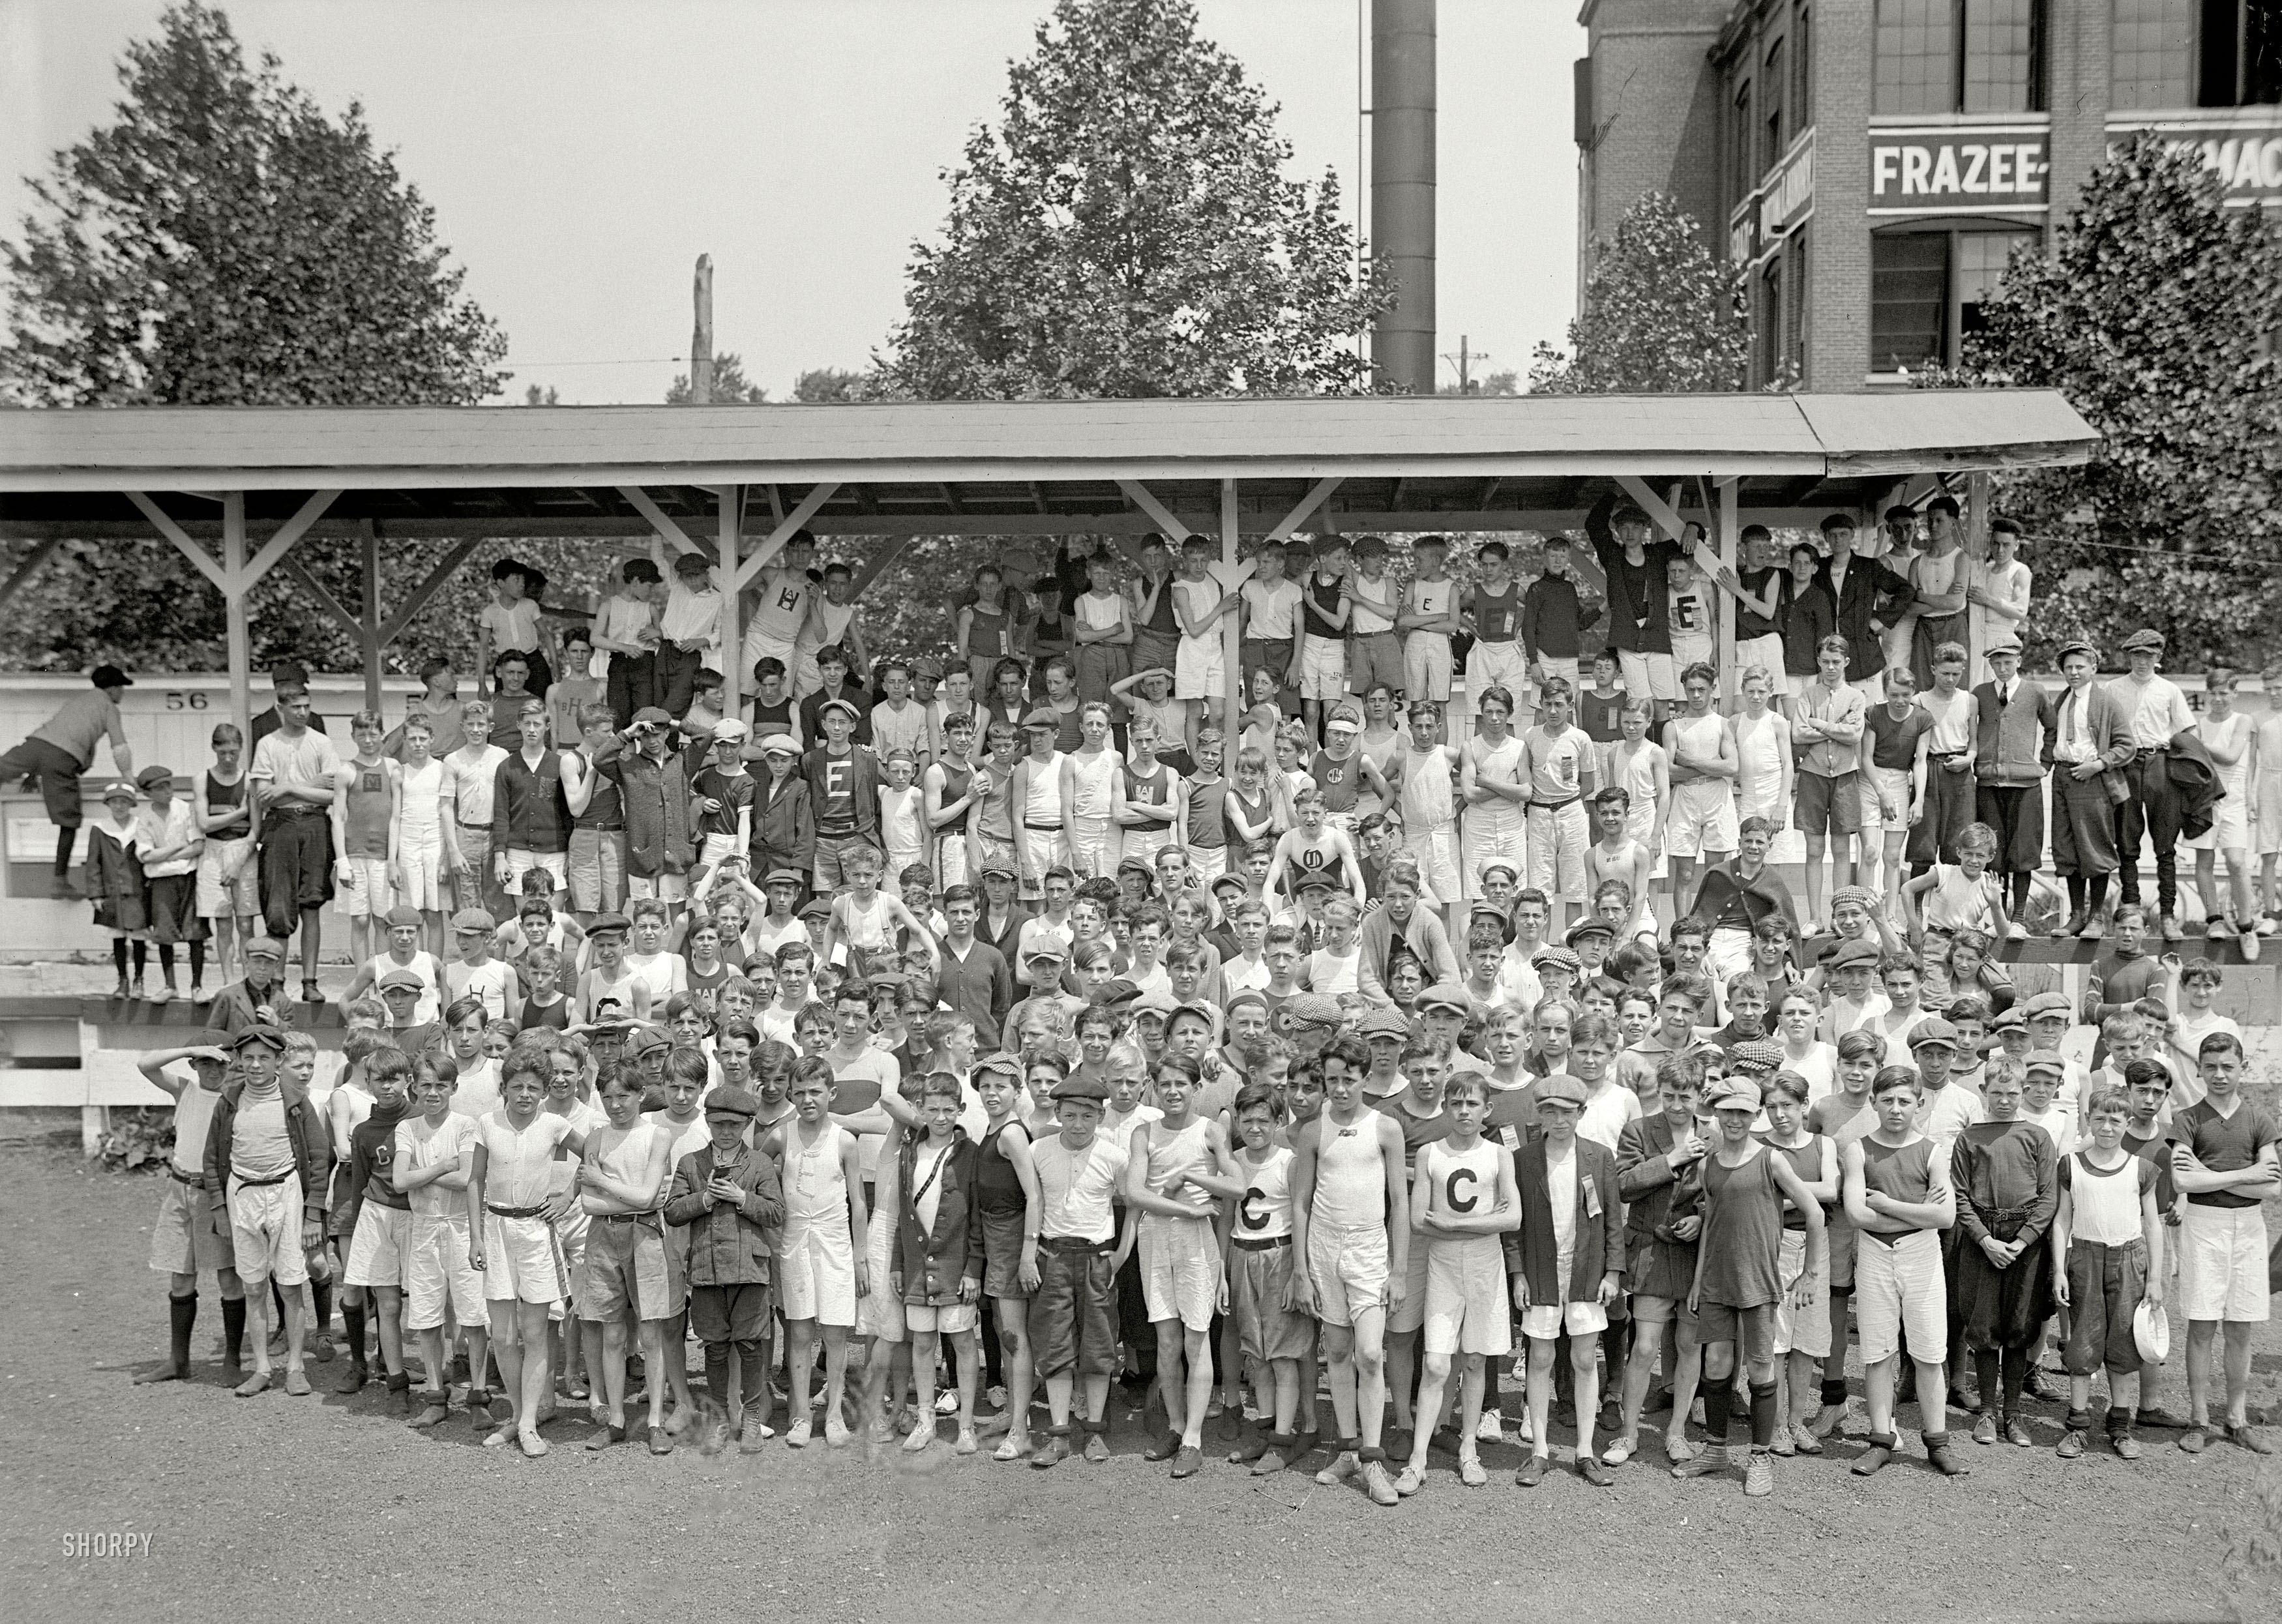 Washington, D.C., 1914. "Boy Scouts -- field sports." Our second look at these kids. Harris & Ewing Collection glass negative. View full size.